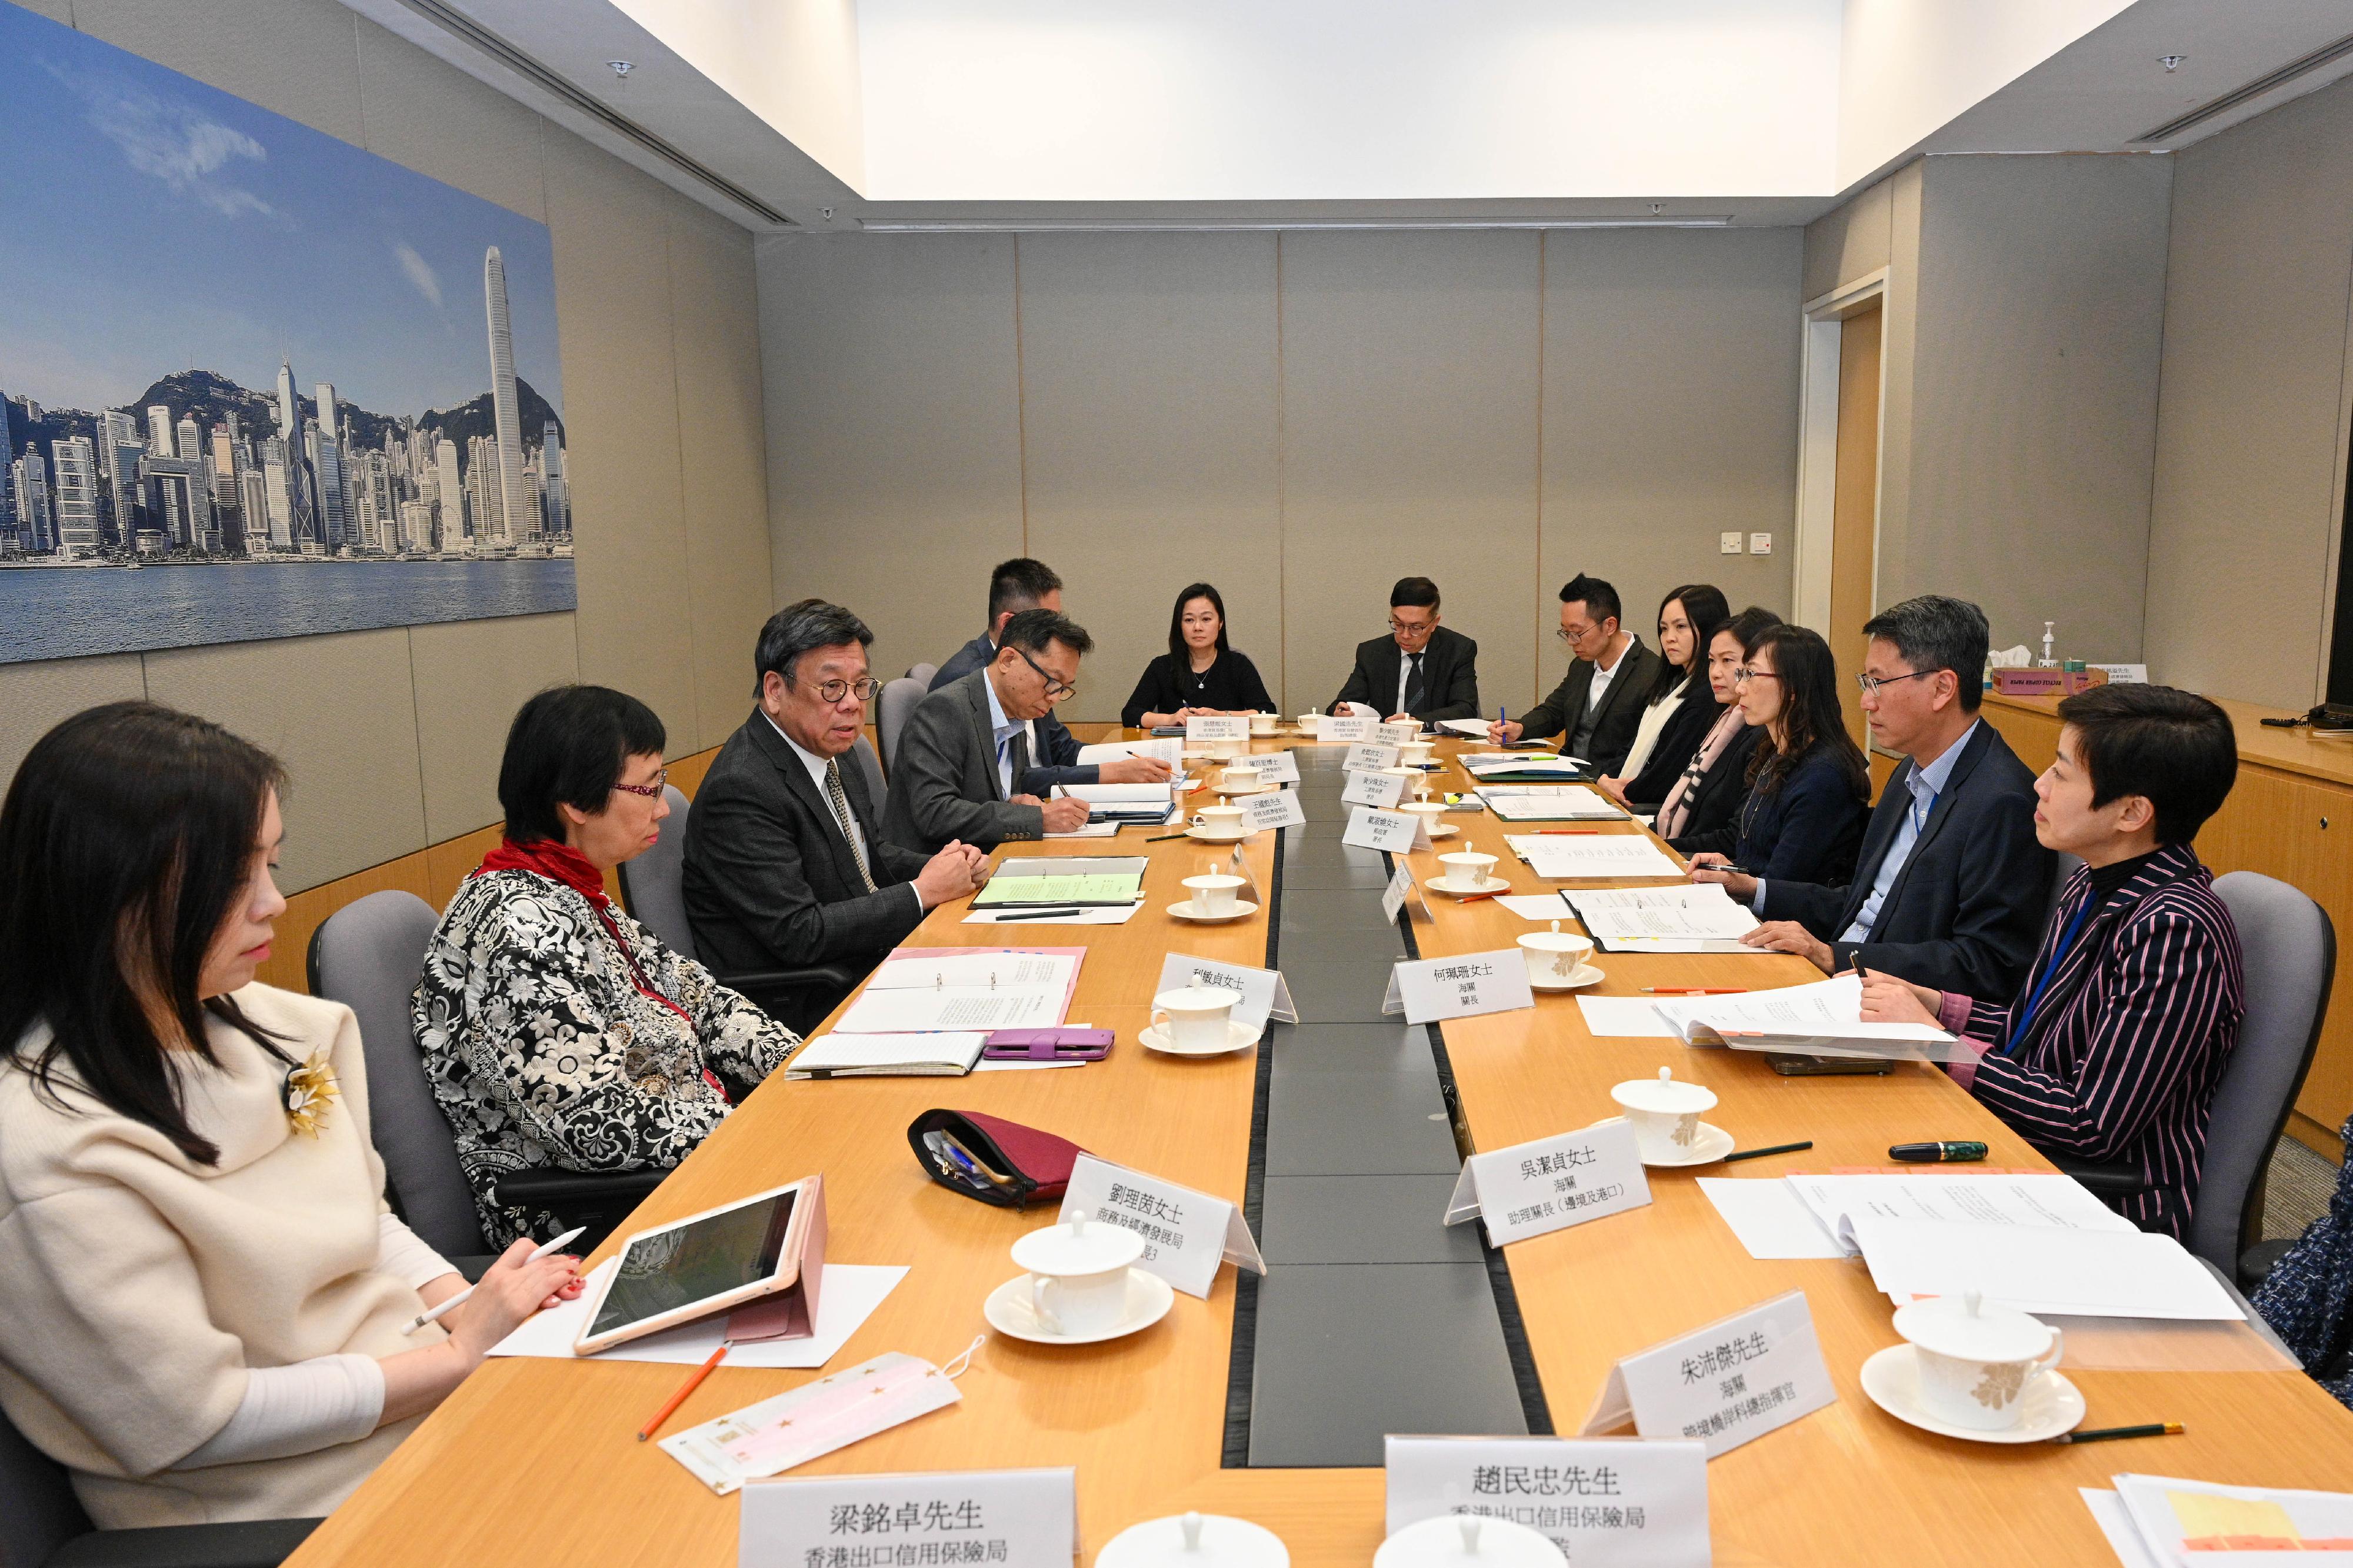 The Commerce and Economic Development Bureau today (January 29) established the E-commerce Development Task Force and convened its first meeting to kick-start the work on co-ordinating and formulating policies and measures on the development of electronic commerce.